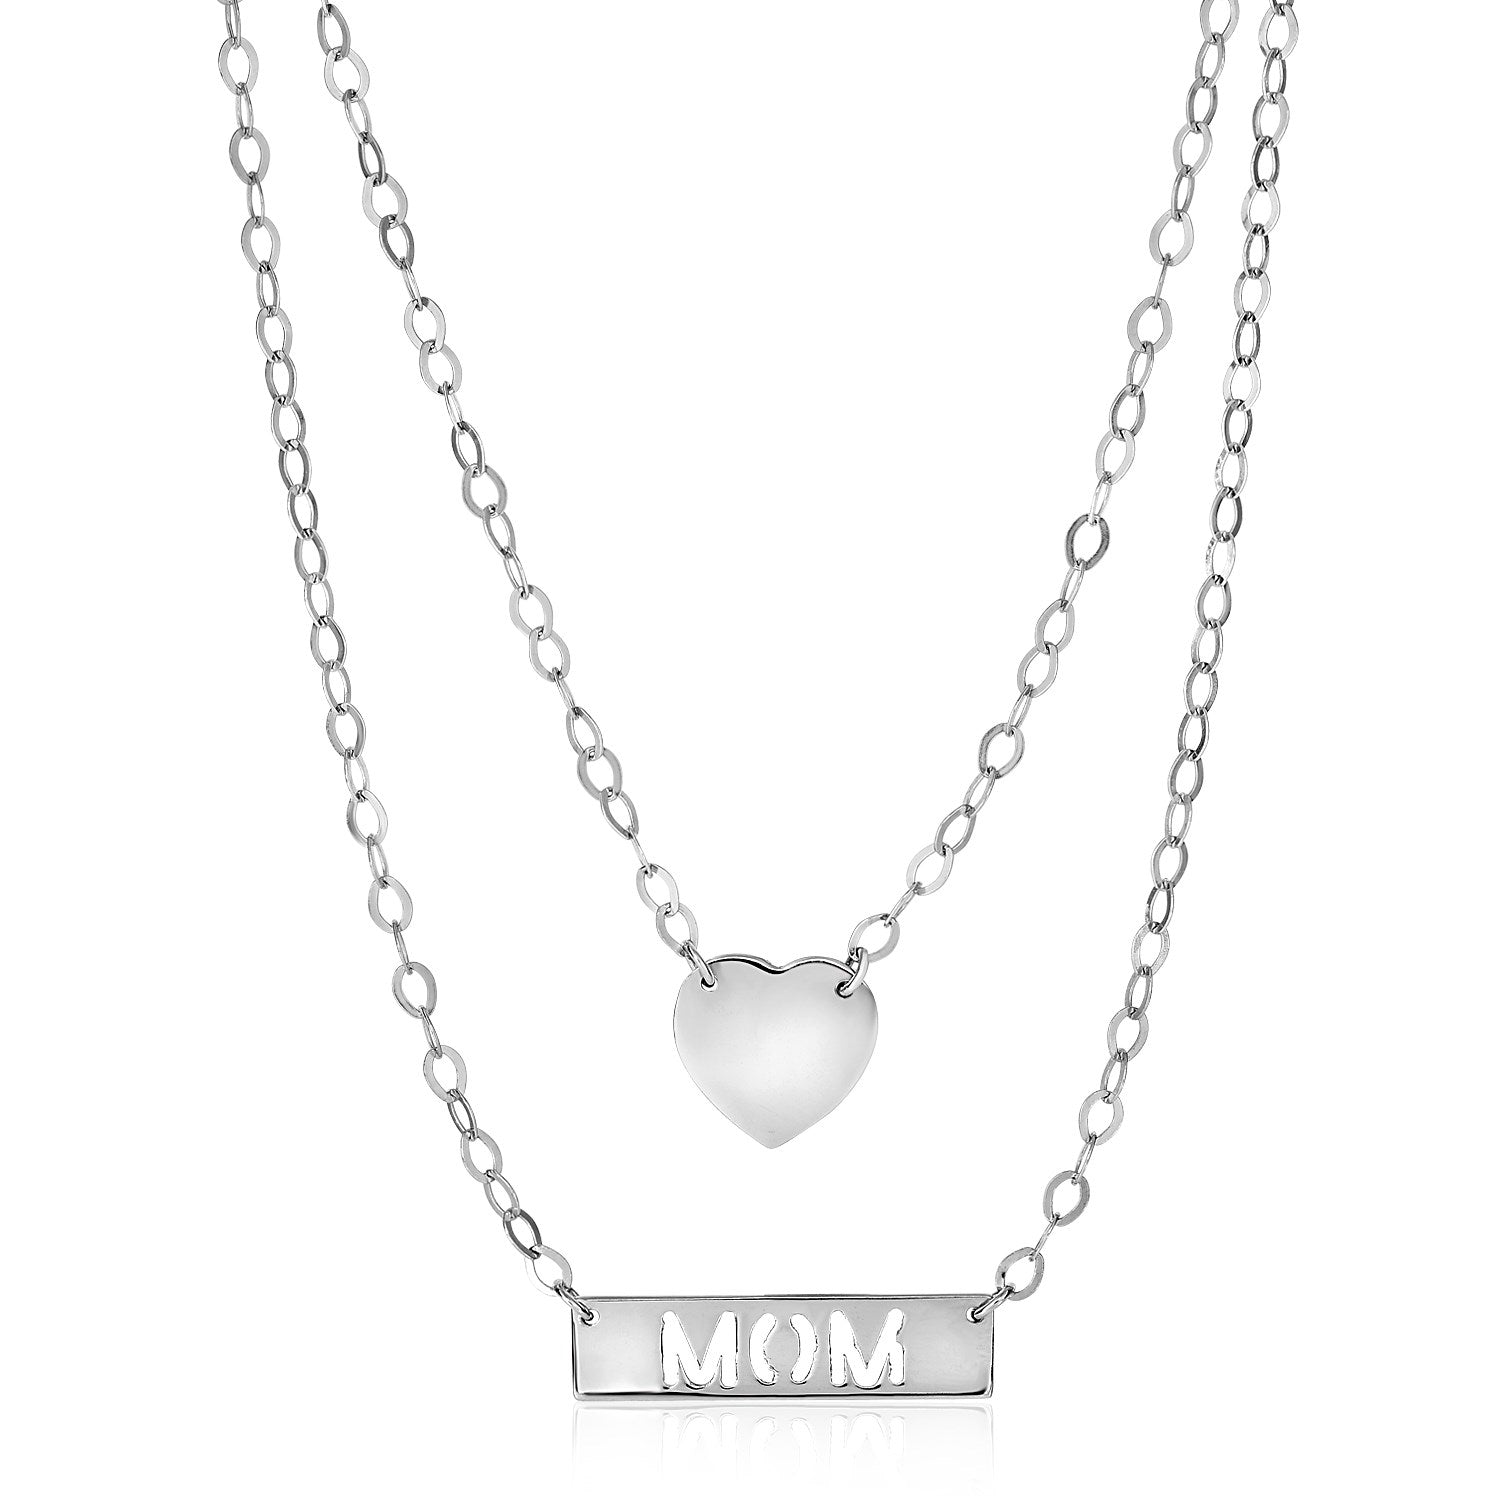 Sterling Silver 18 inch Two Strand Necklace with Heart and Mom Charms